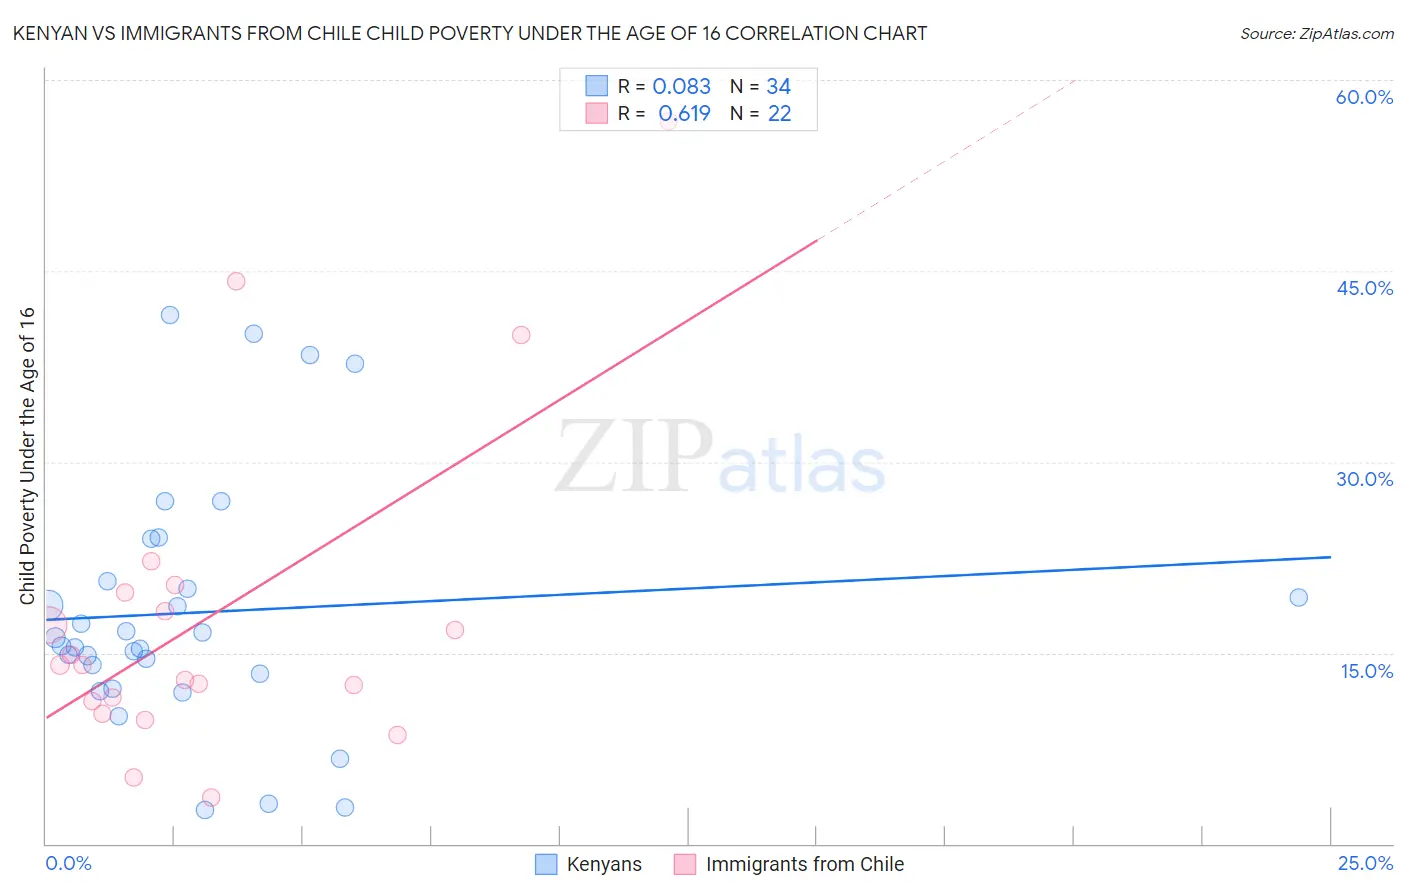 Kenyan vs Immigrants from Chile Child Poverty Under the Age of 16